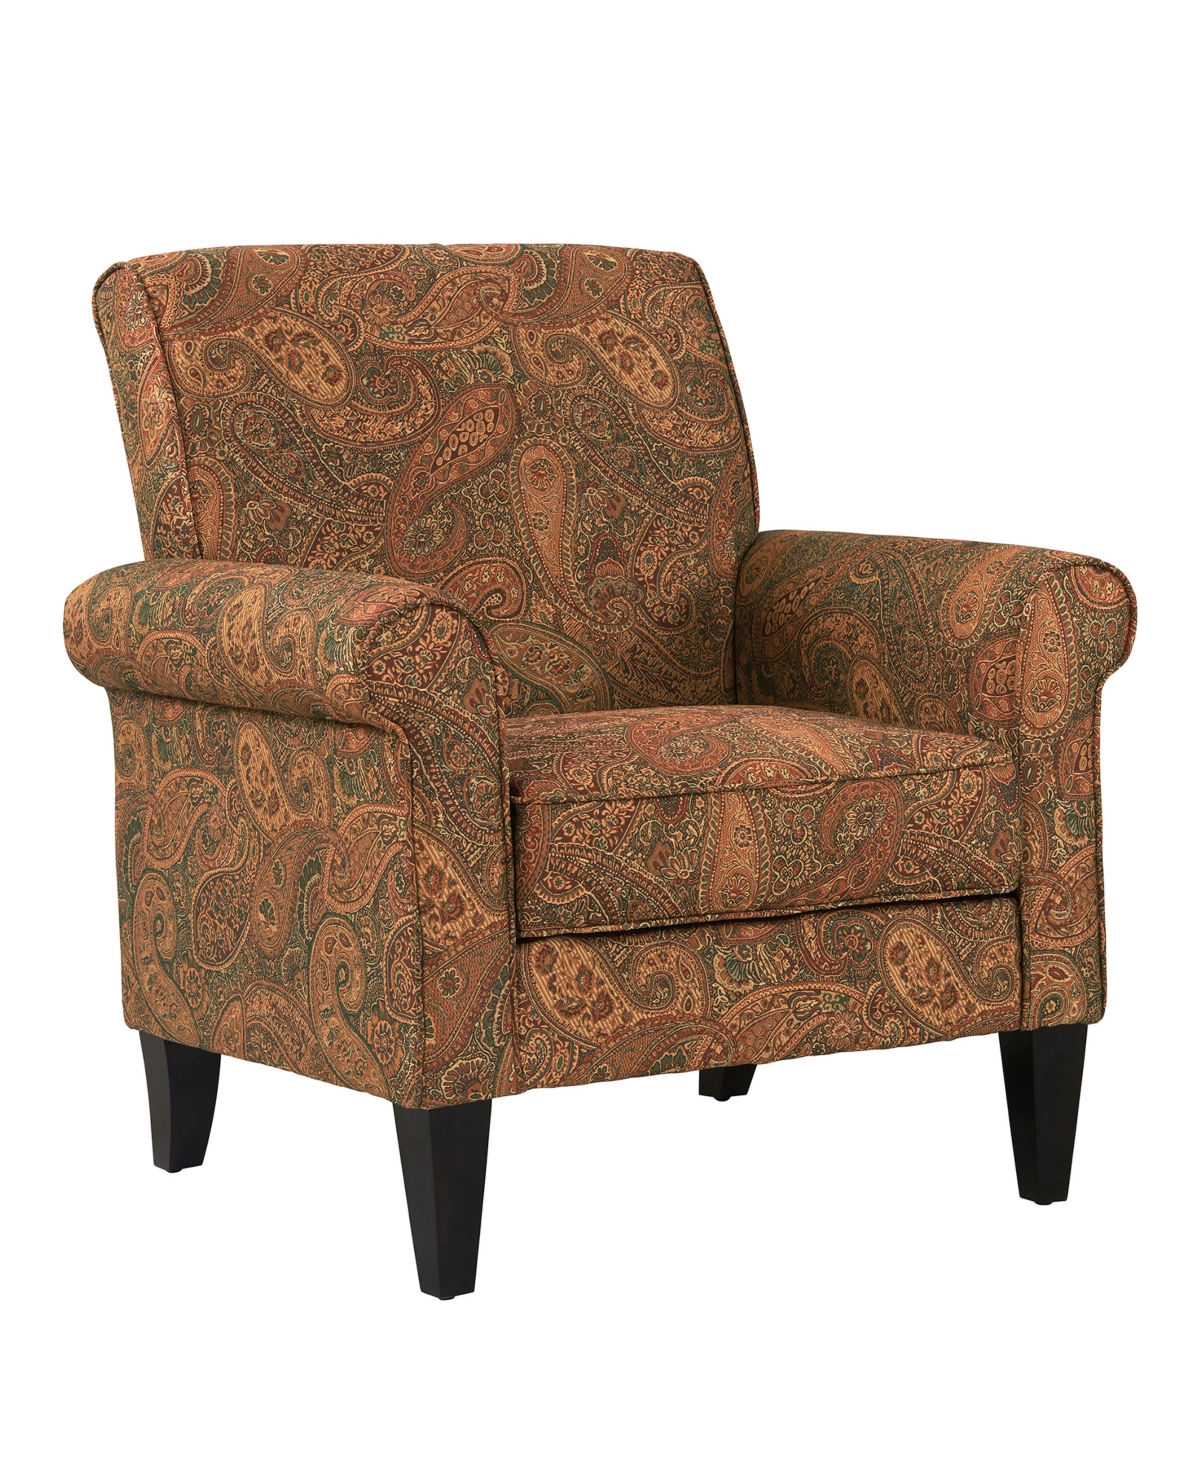 UPC 843201100014 product image for Janet Traditional Rolled Arm Armchair | upcitemdb.com